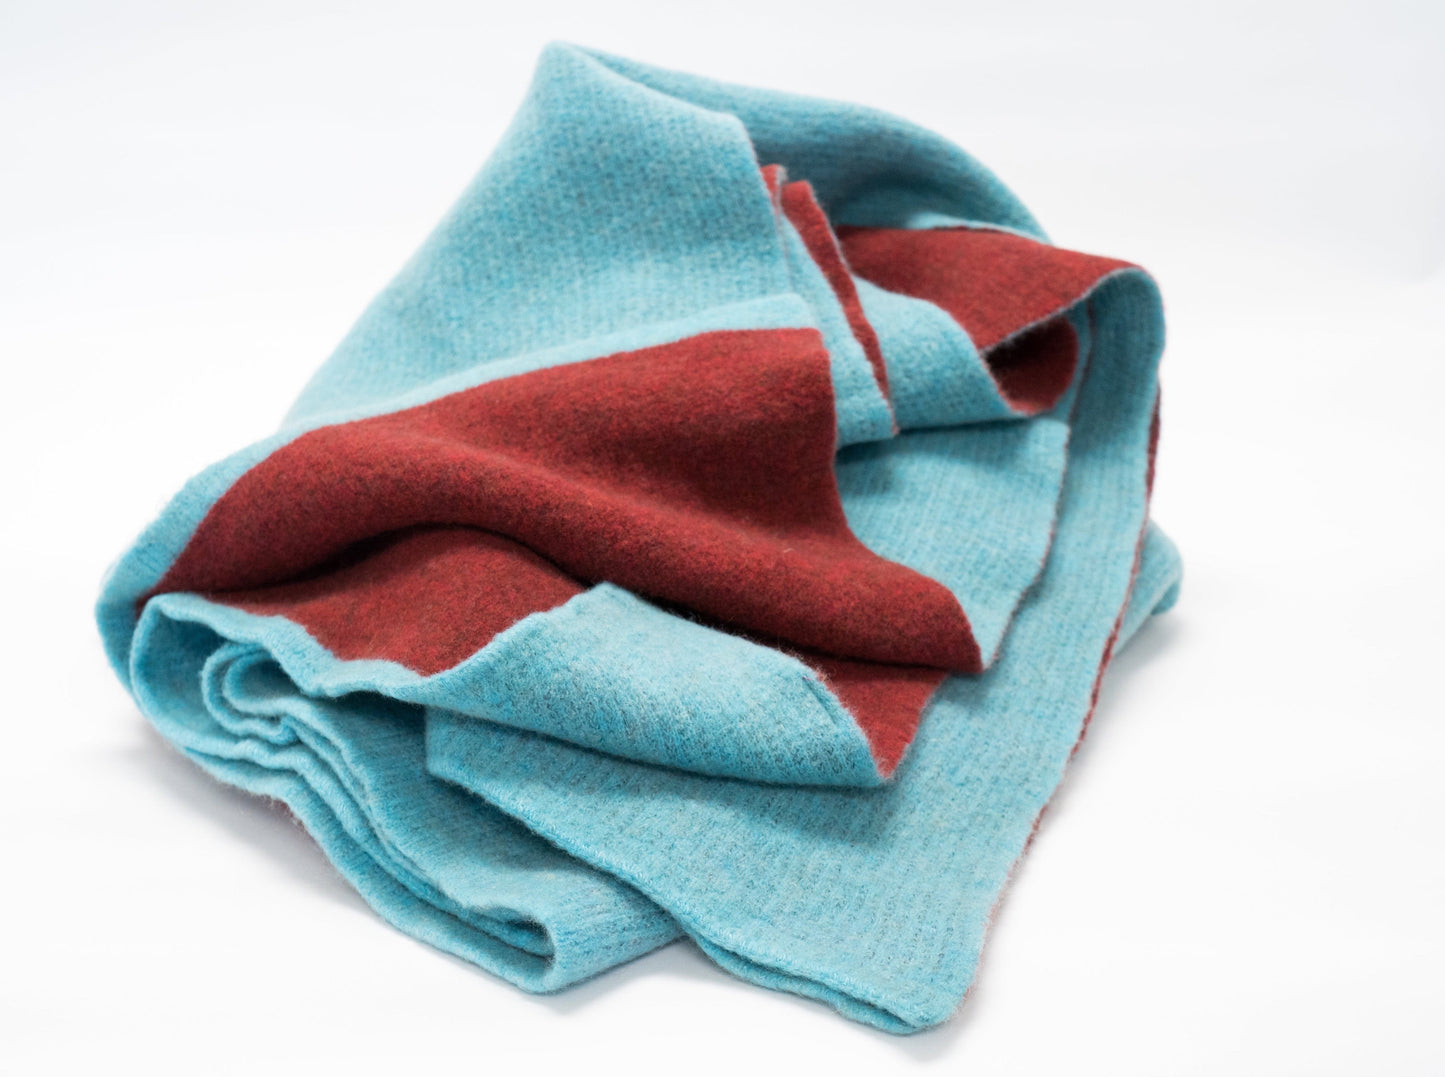 Cabin Throw in Turquoise & Brick Red